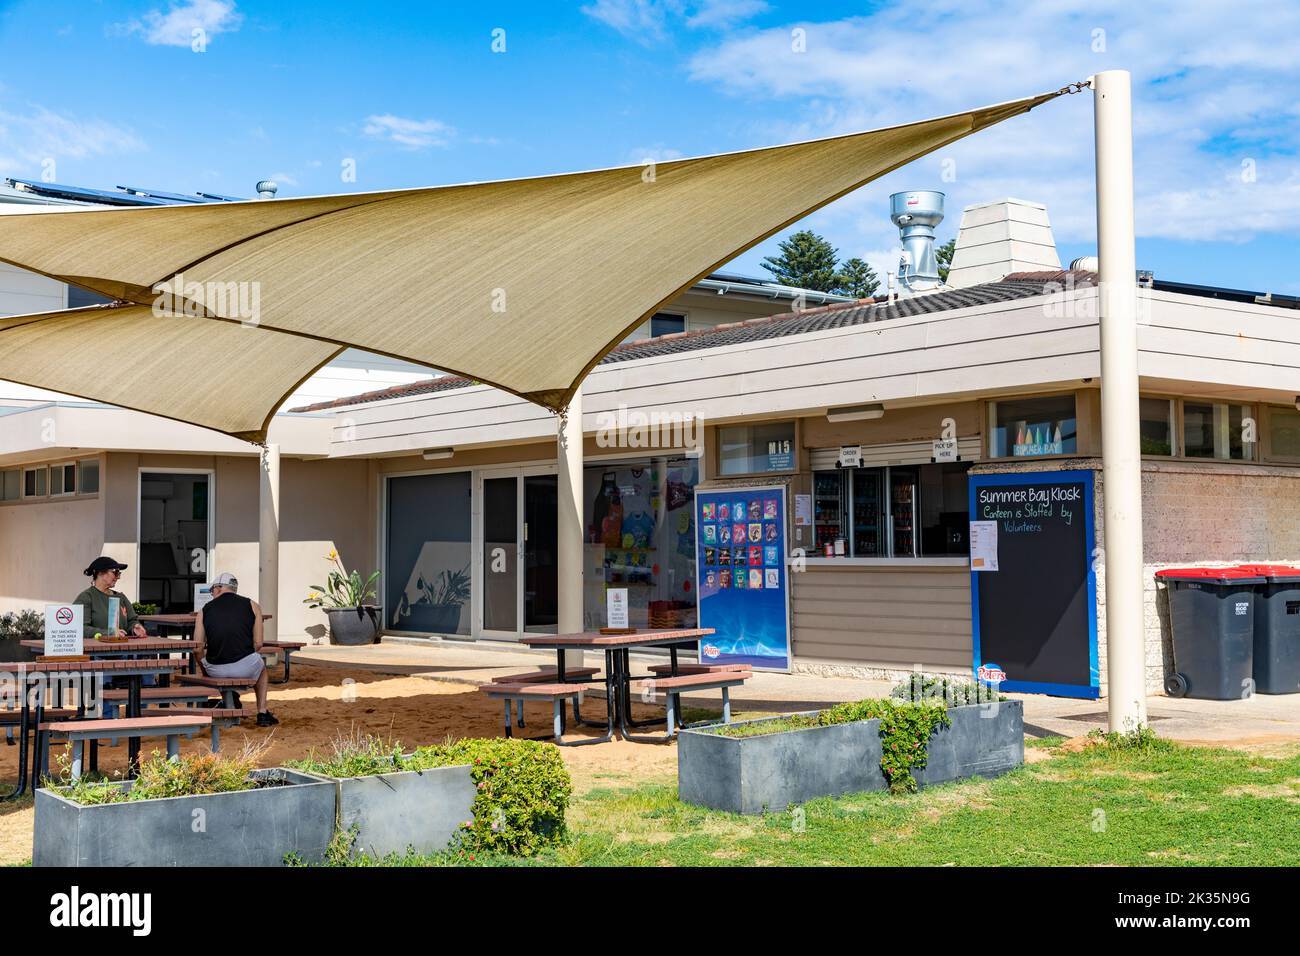 North Palm Beach surf club in Sydney, also known as Summer Bay surf club and food kiosk from the television Neighbours,NSW,Australia Stock Photo